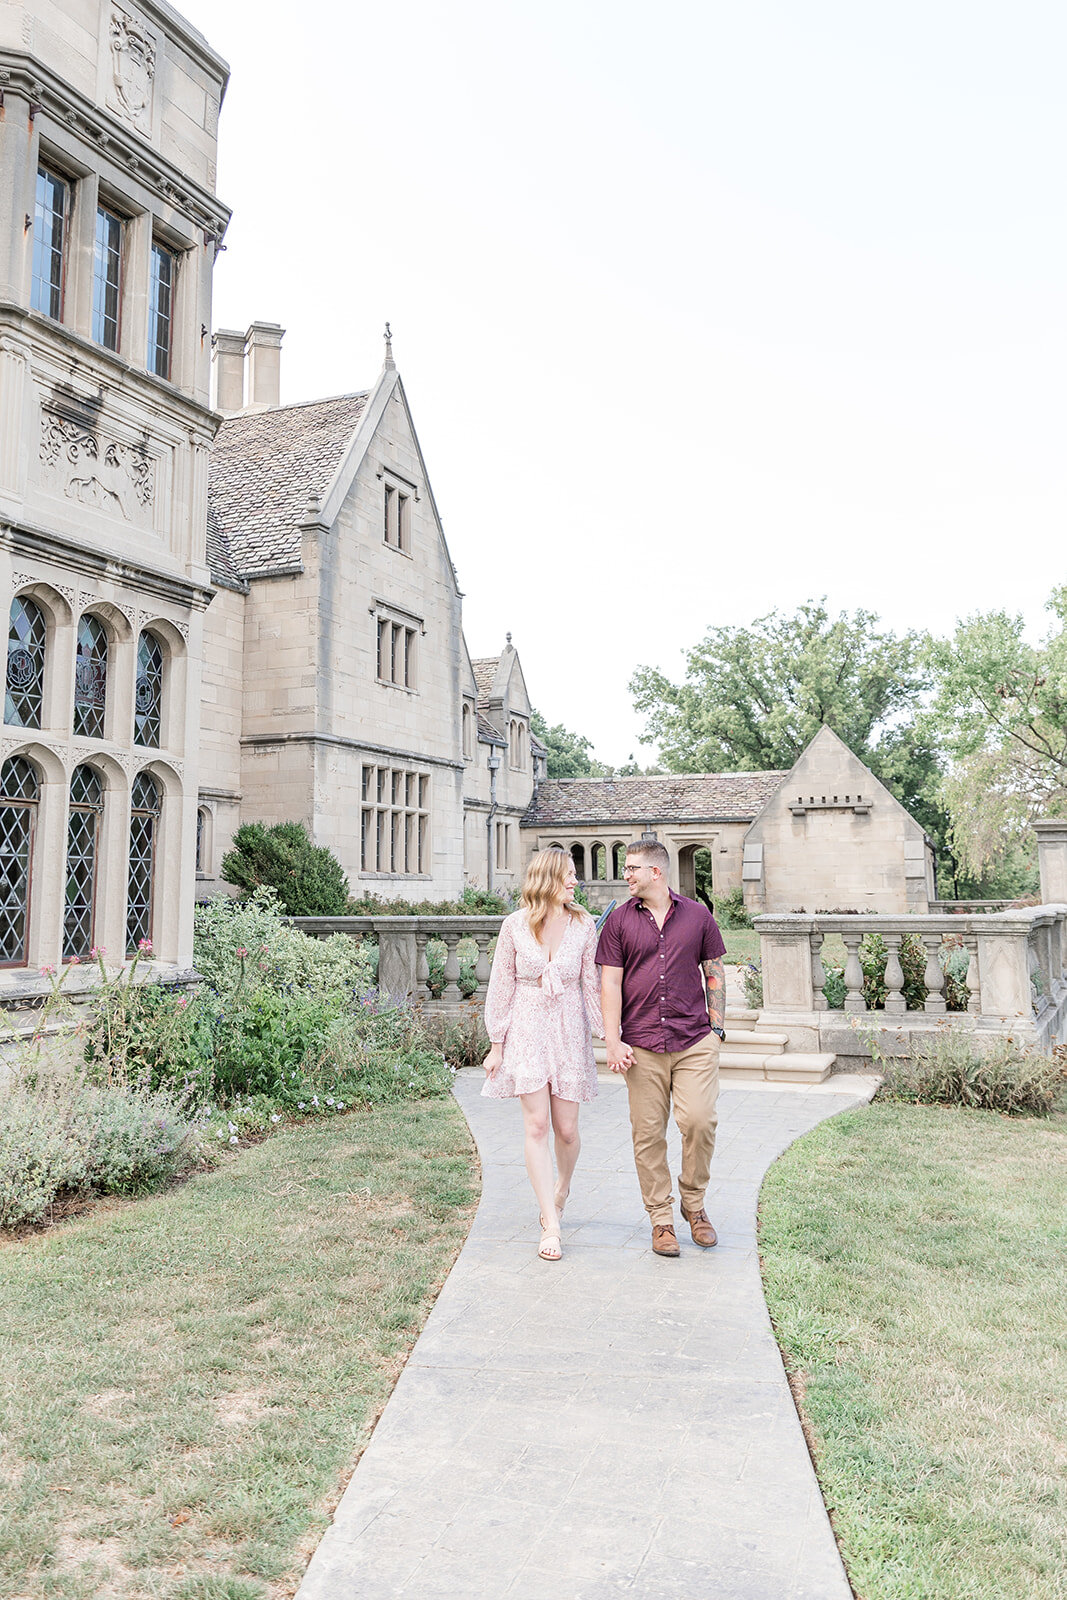 Haley and Josh's Summertime Engagement Session at Hartwood Acres and North Shore